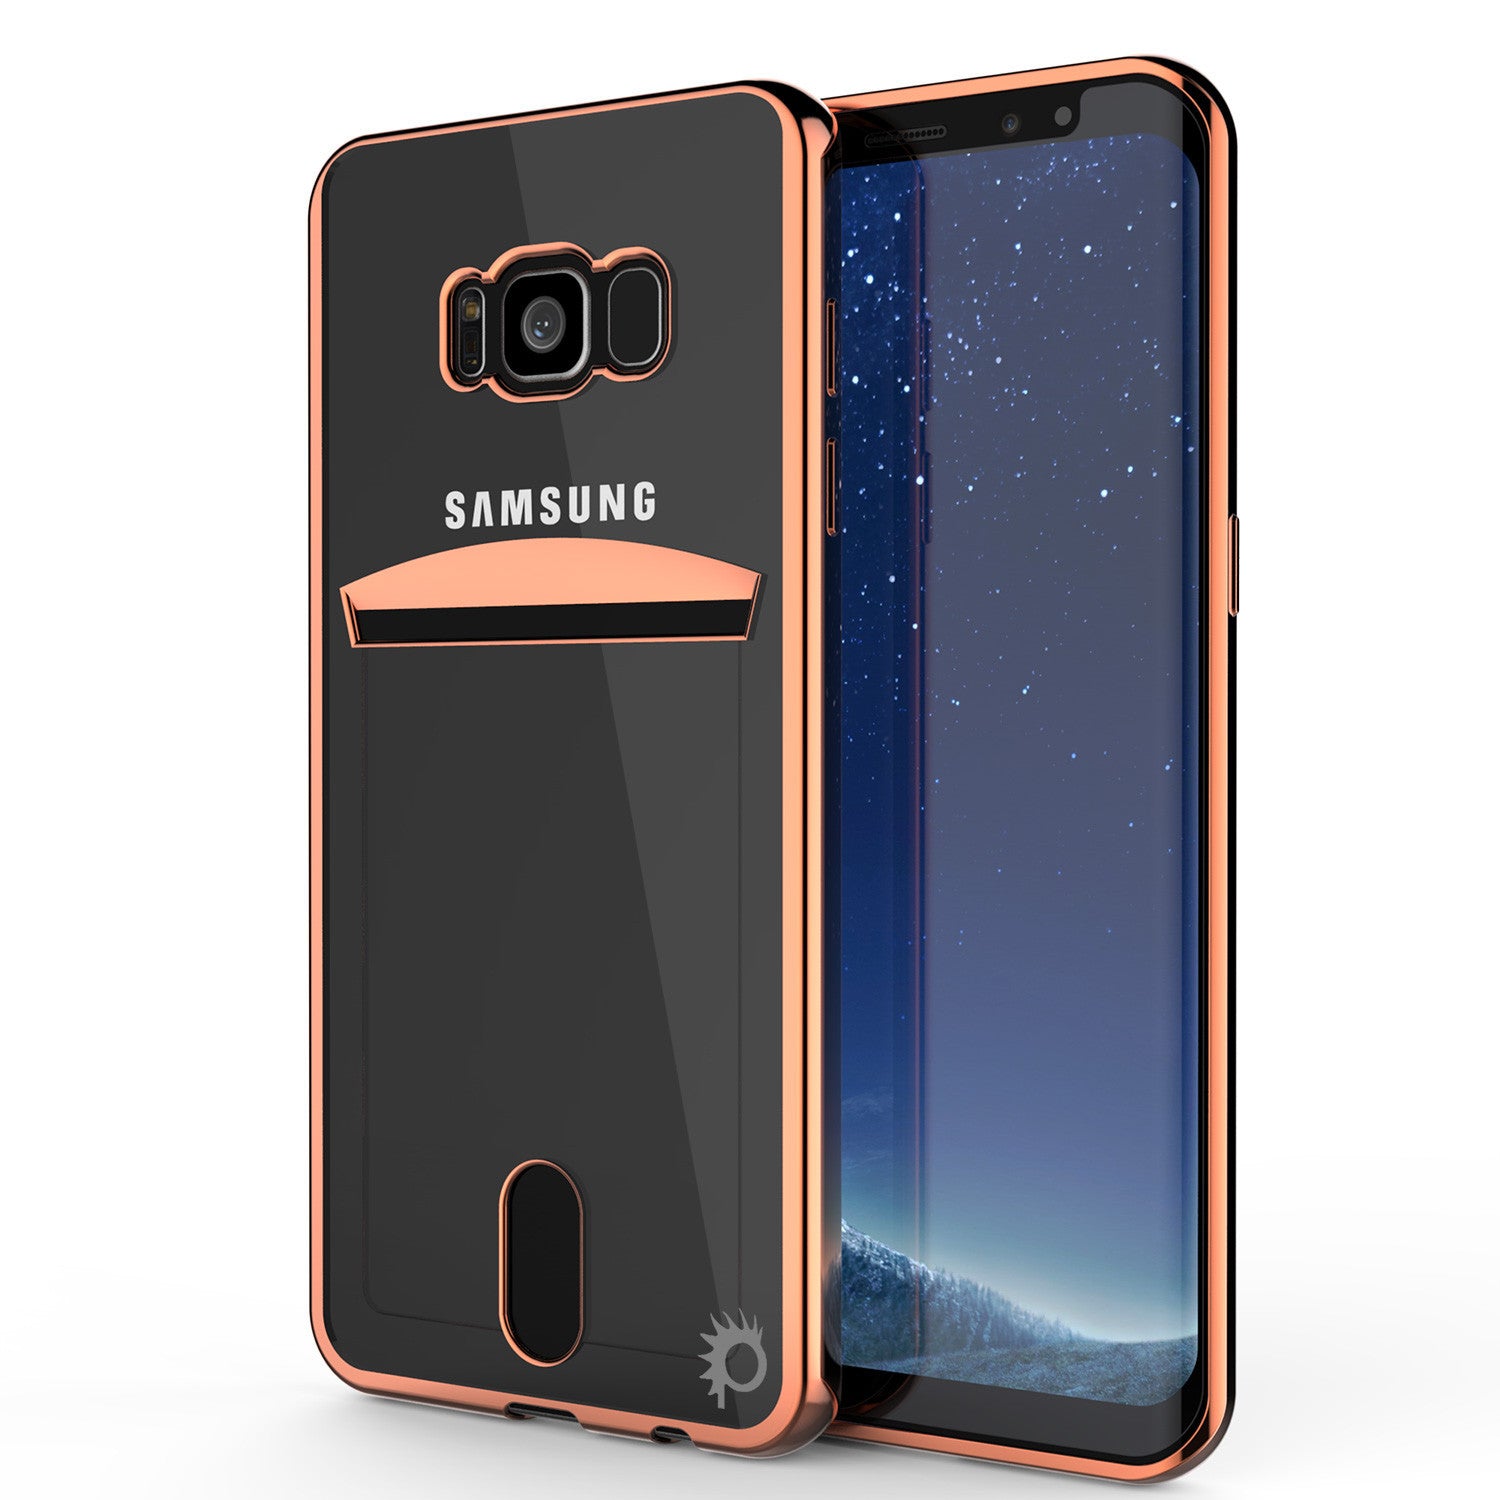 Galaxy S8 Plus Case, PUNKCASE® LUCID Rose Gold Series | Card Slot | SHIELD Screen Protector (Color in image: Rose Gold)